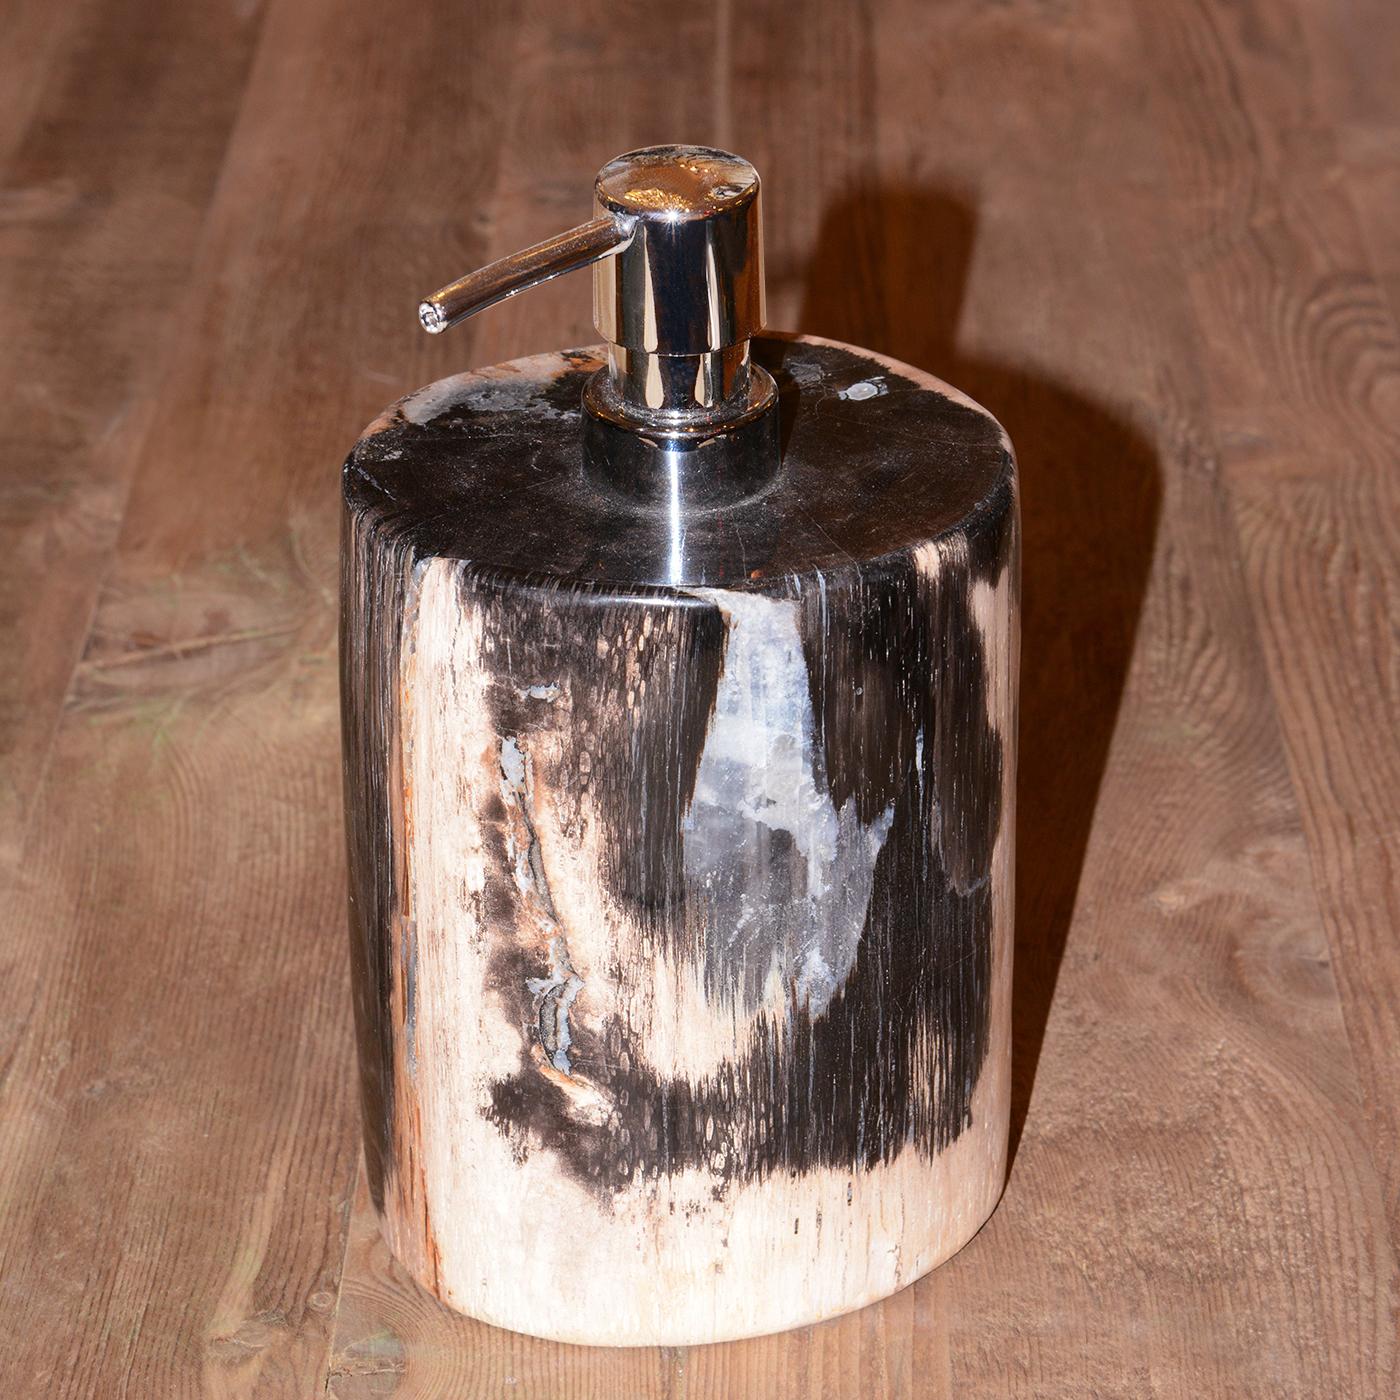 Soap Dispenser Petrified Wood A with all structure
in solid petrified wood and with chromed aluminium
dispensing cap.